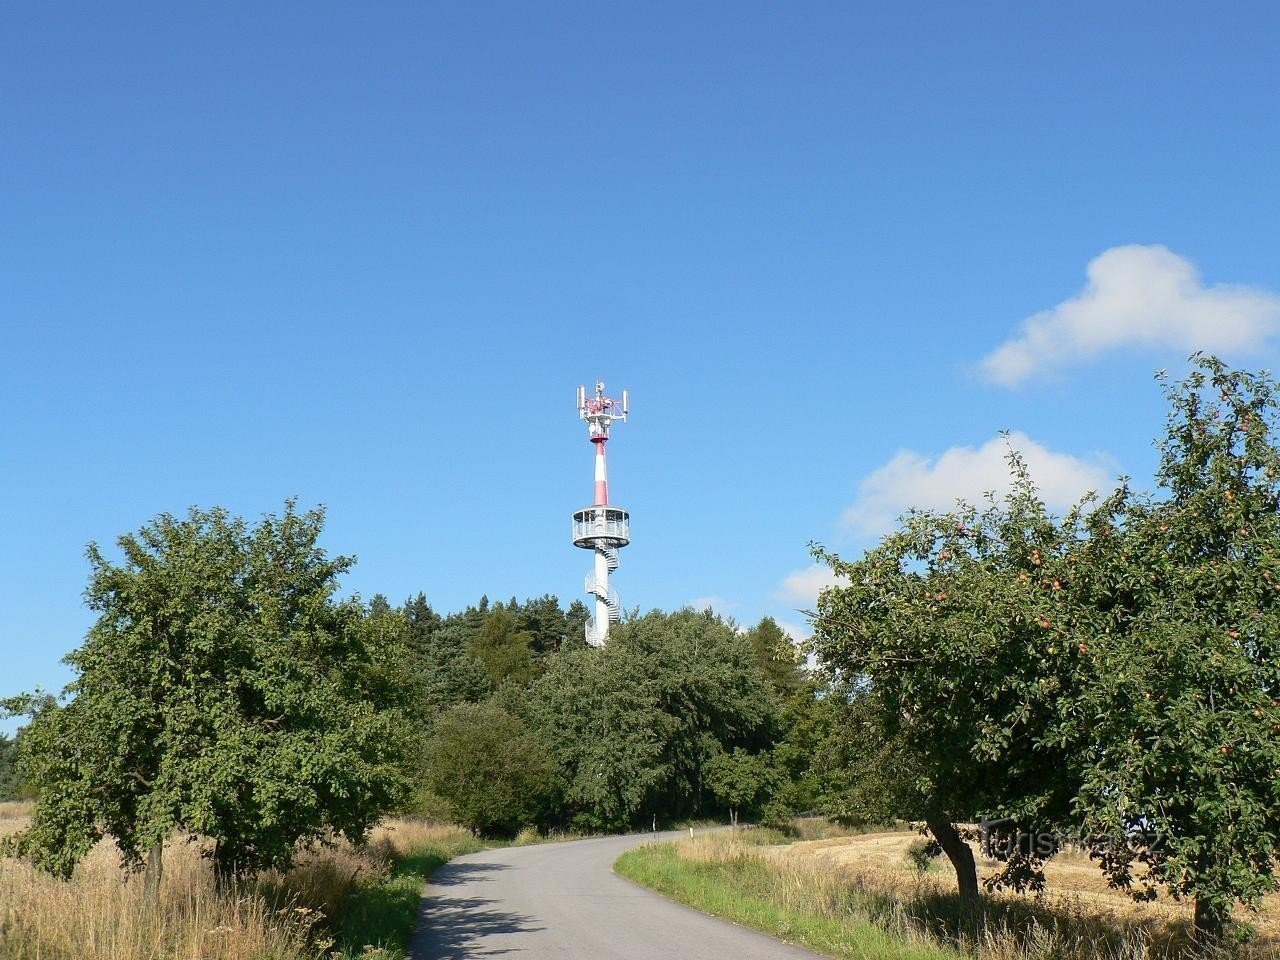 Pětnice lookout tower from the east